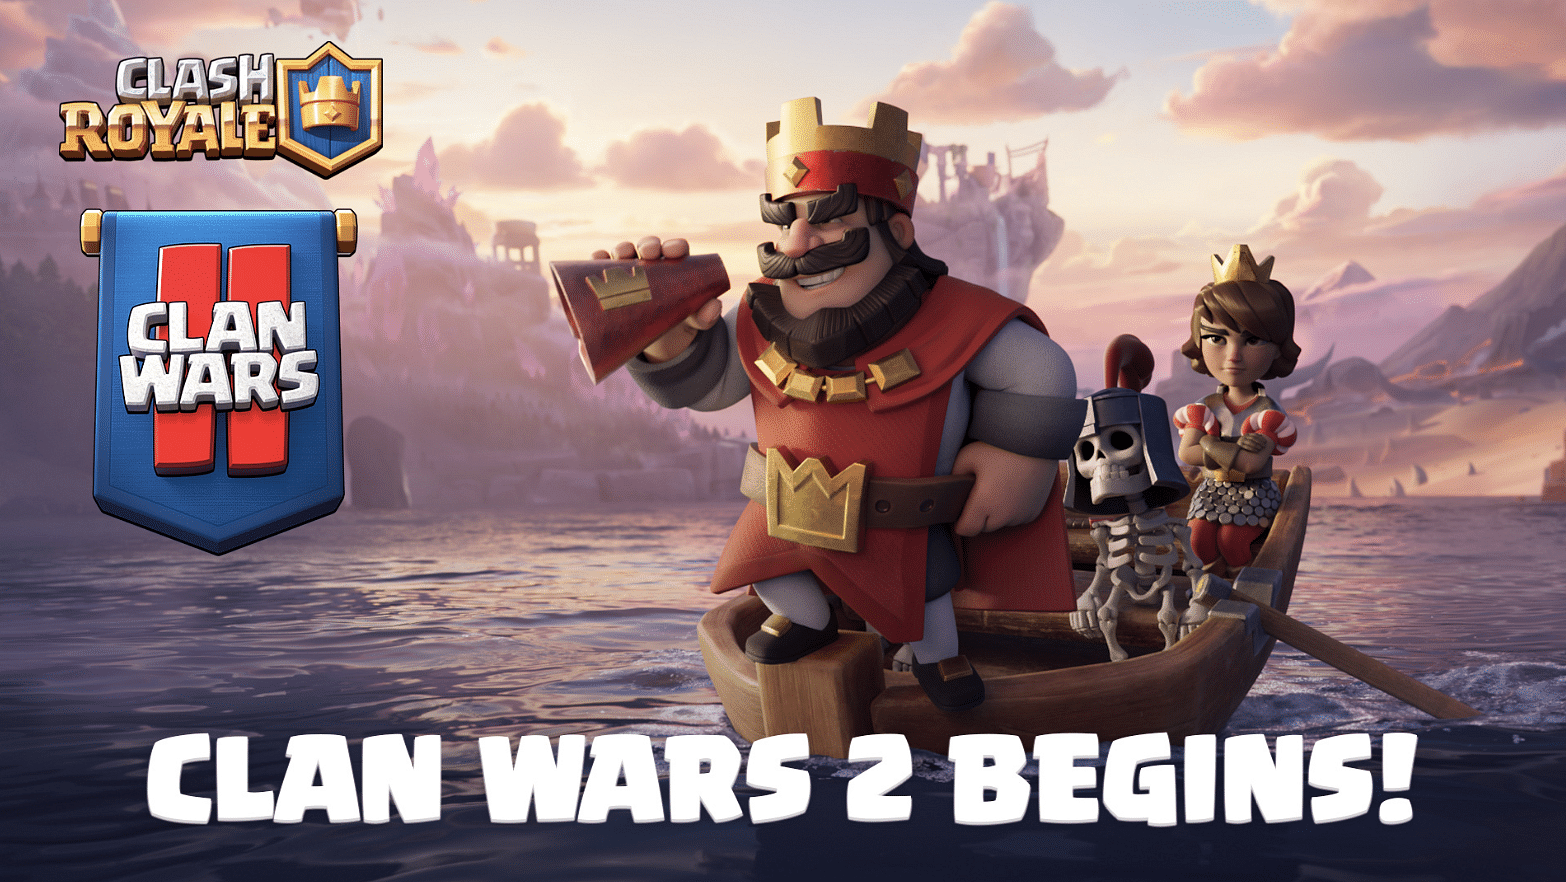 Jio Games Clash Royale Contest: Tips & Tricks, Rules, Format